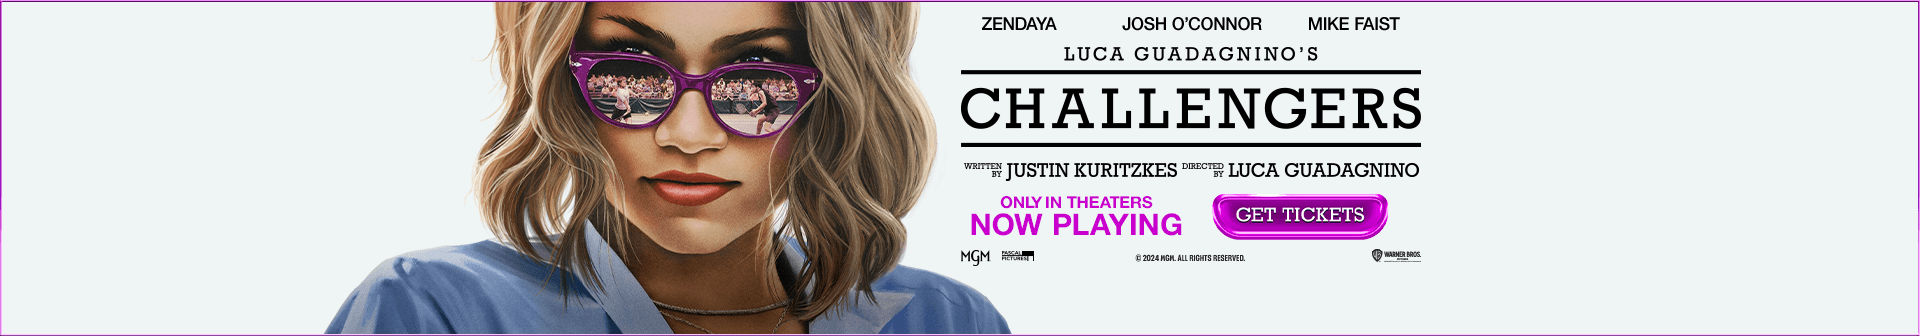 Challengers, now playing in theatres. Get tickets